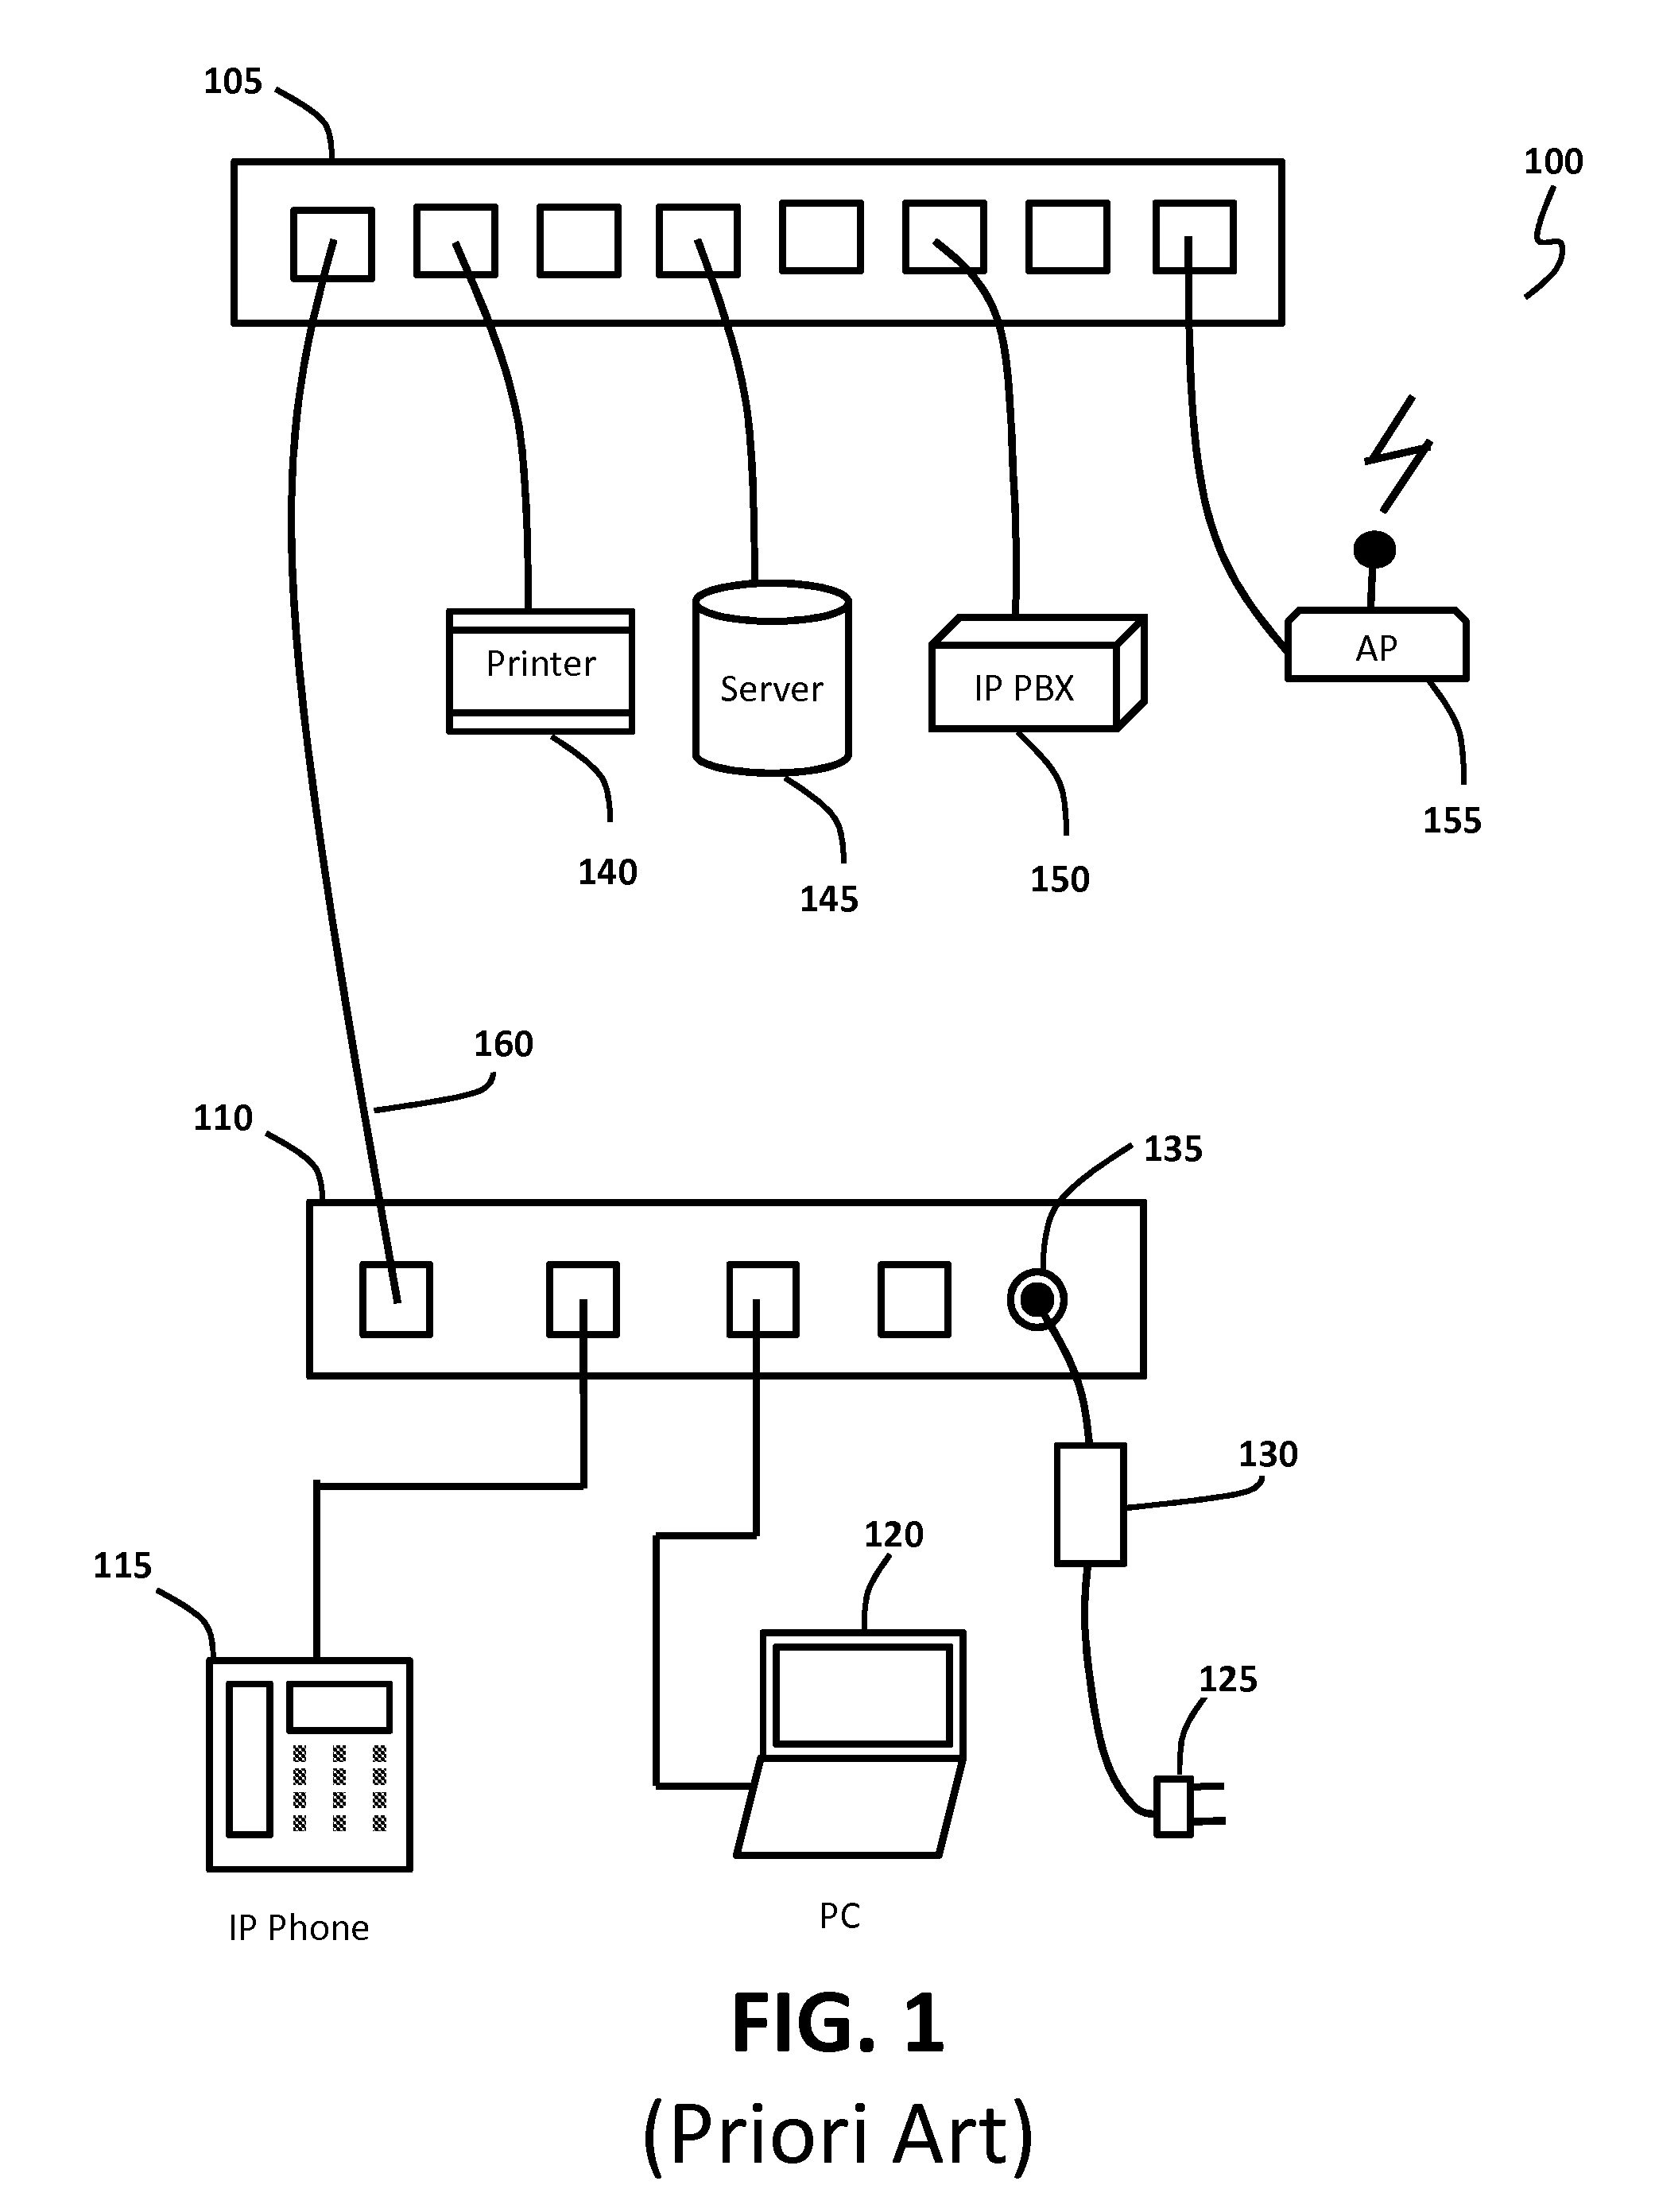 Ethernet Switch and System